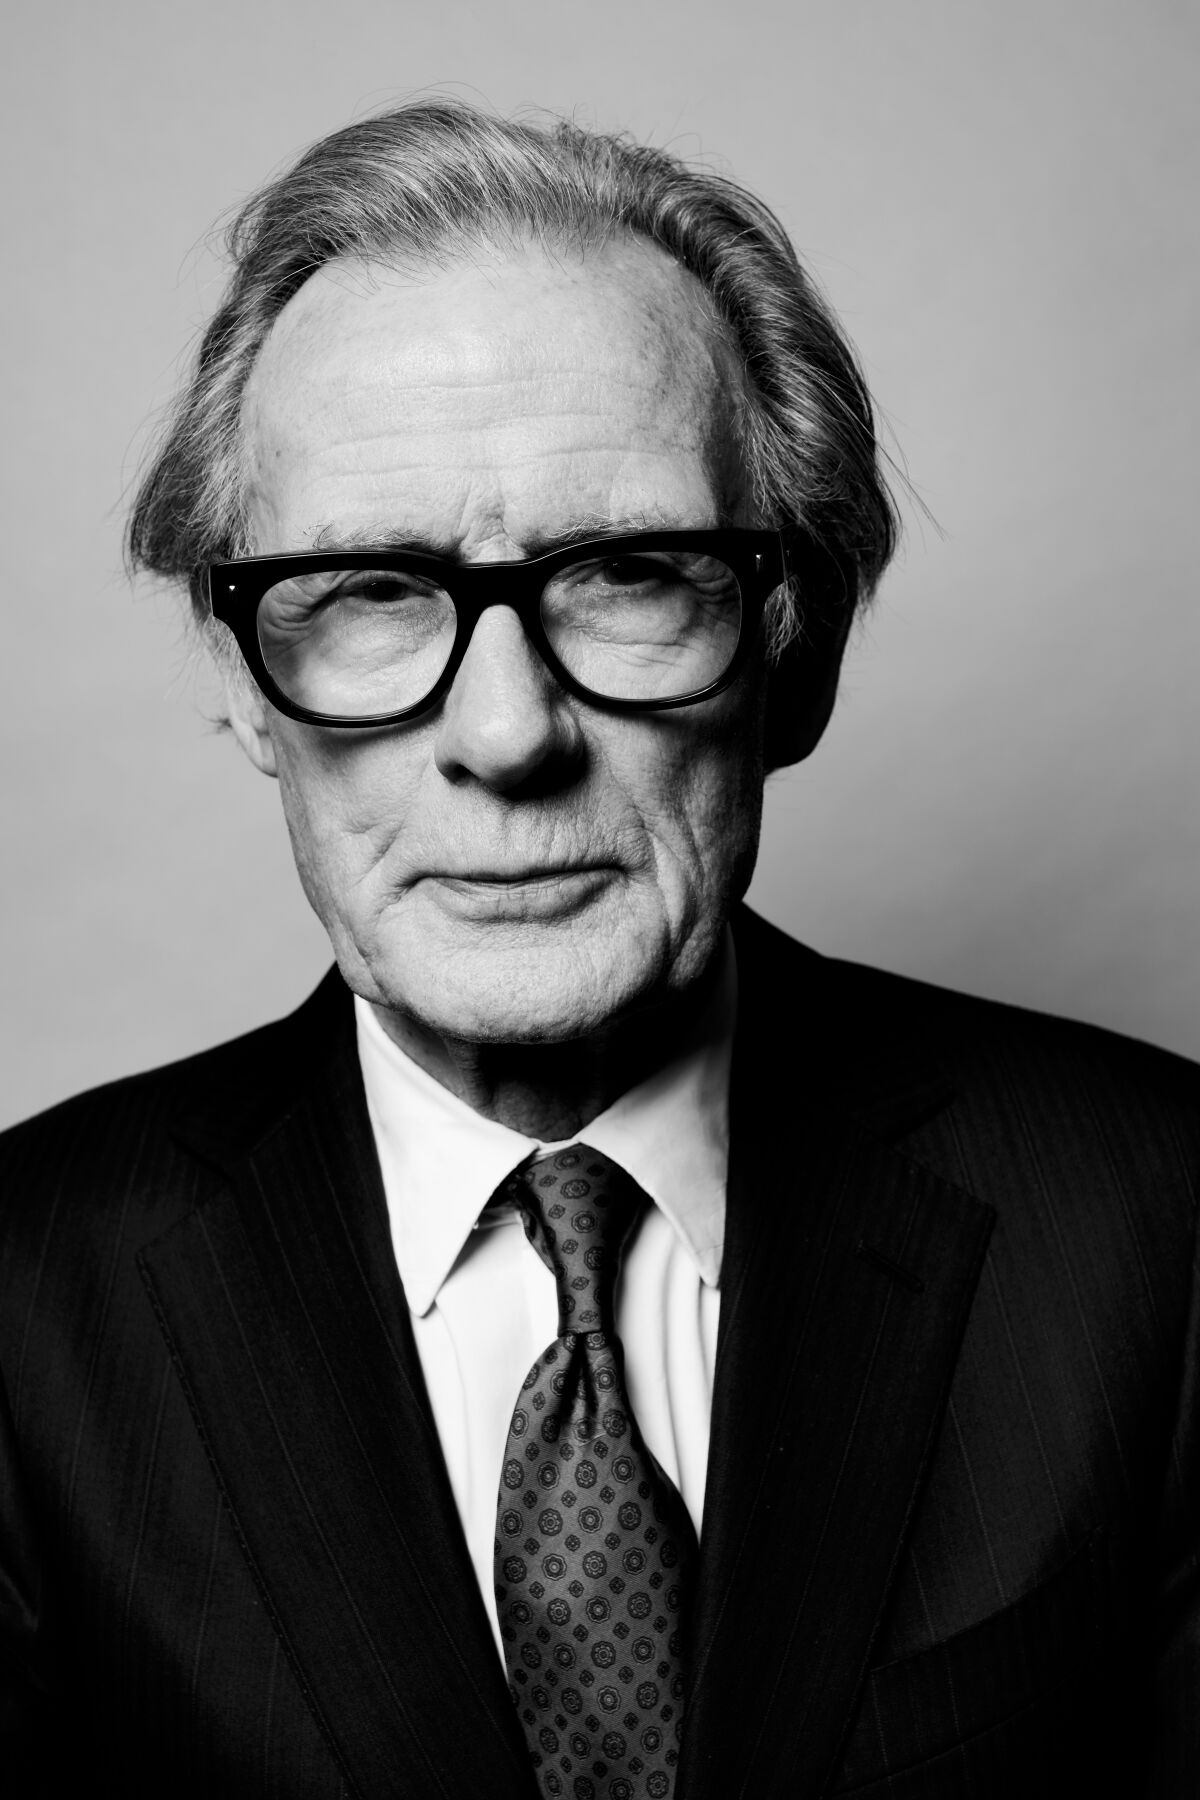 A black-and-white portrait of a man in a dark suit and glasses